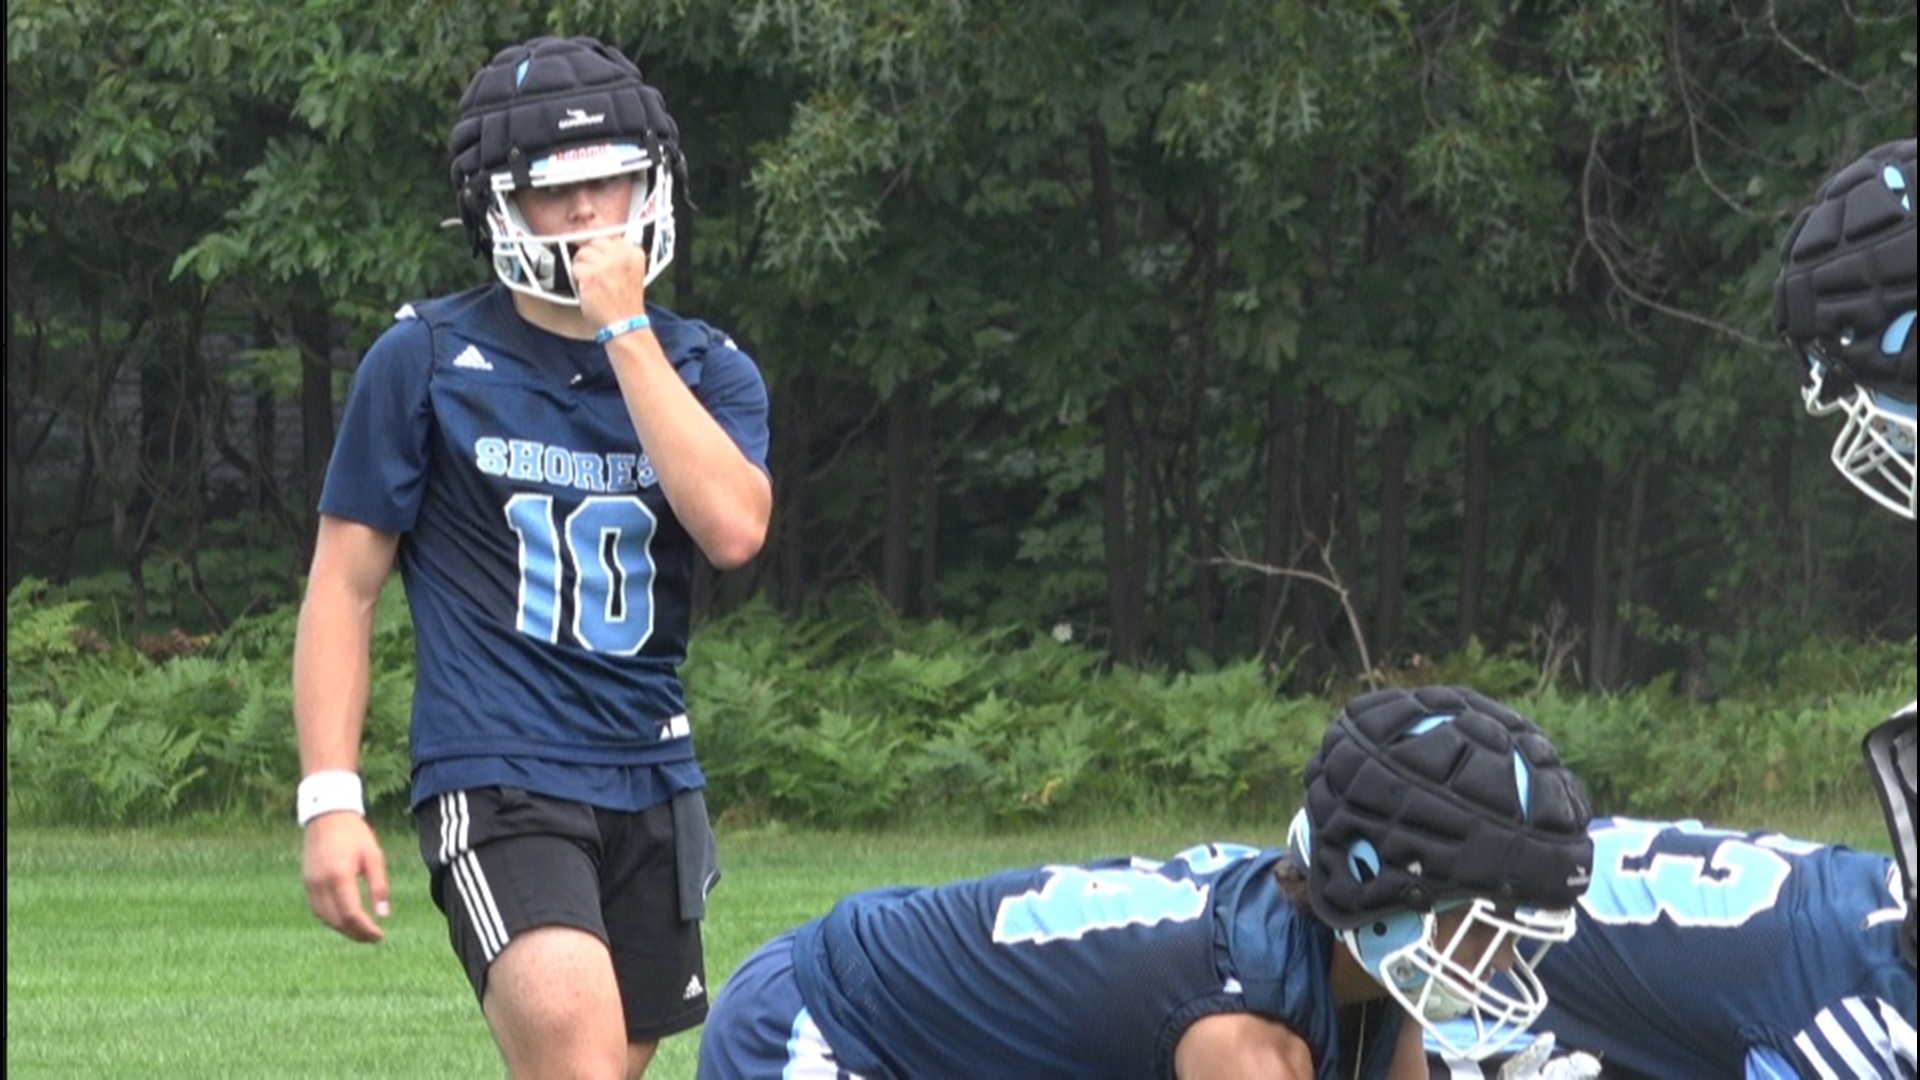 With starting quarterback Hayden Wolff out, it allowed one local product to get his shot.